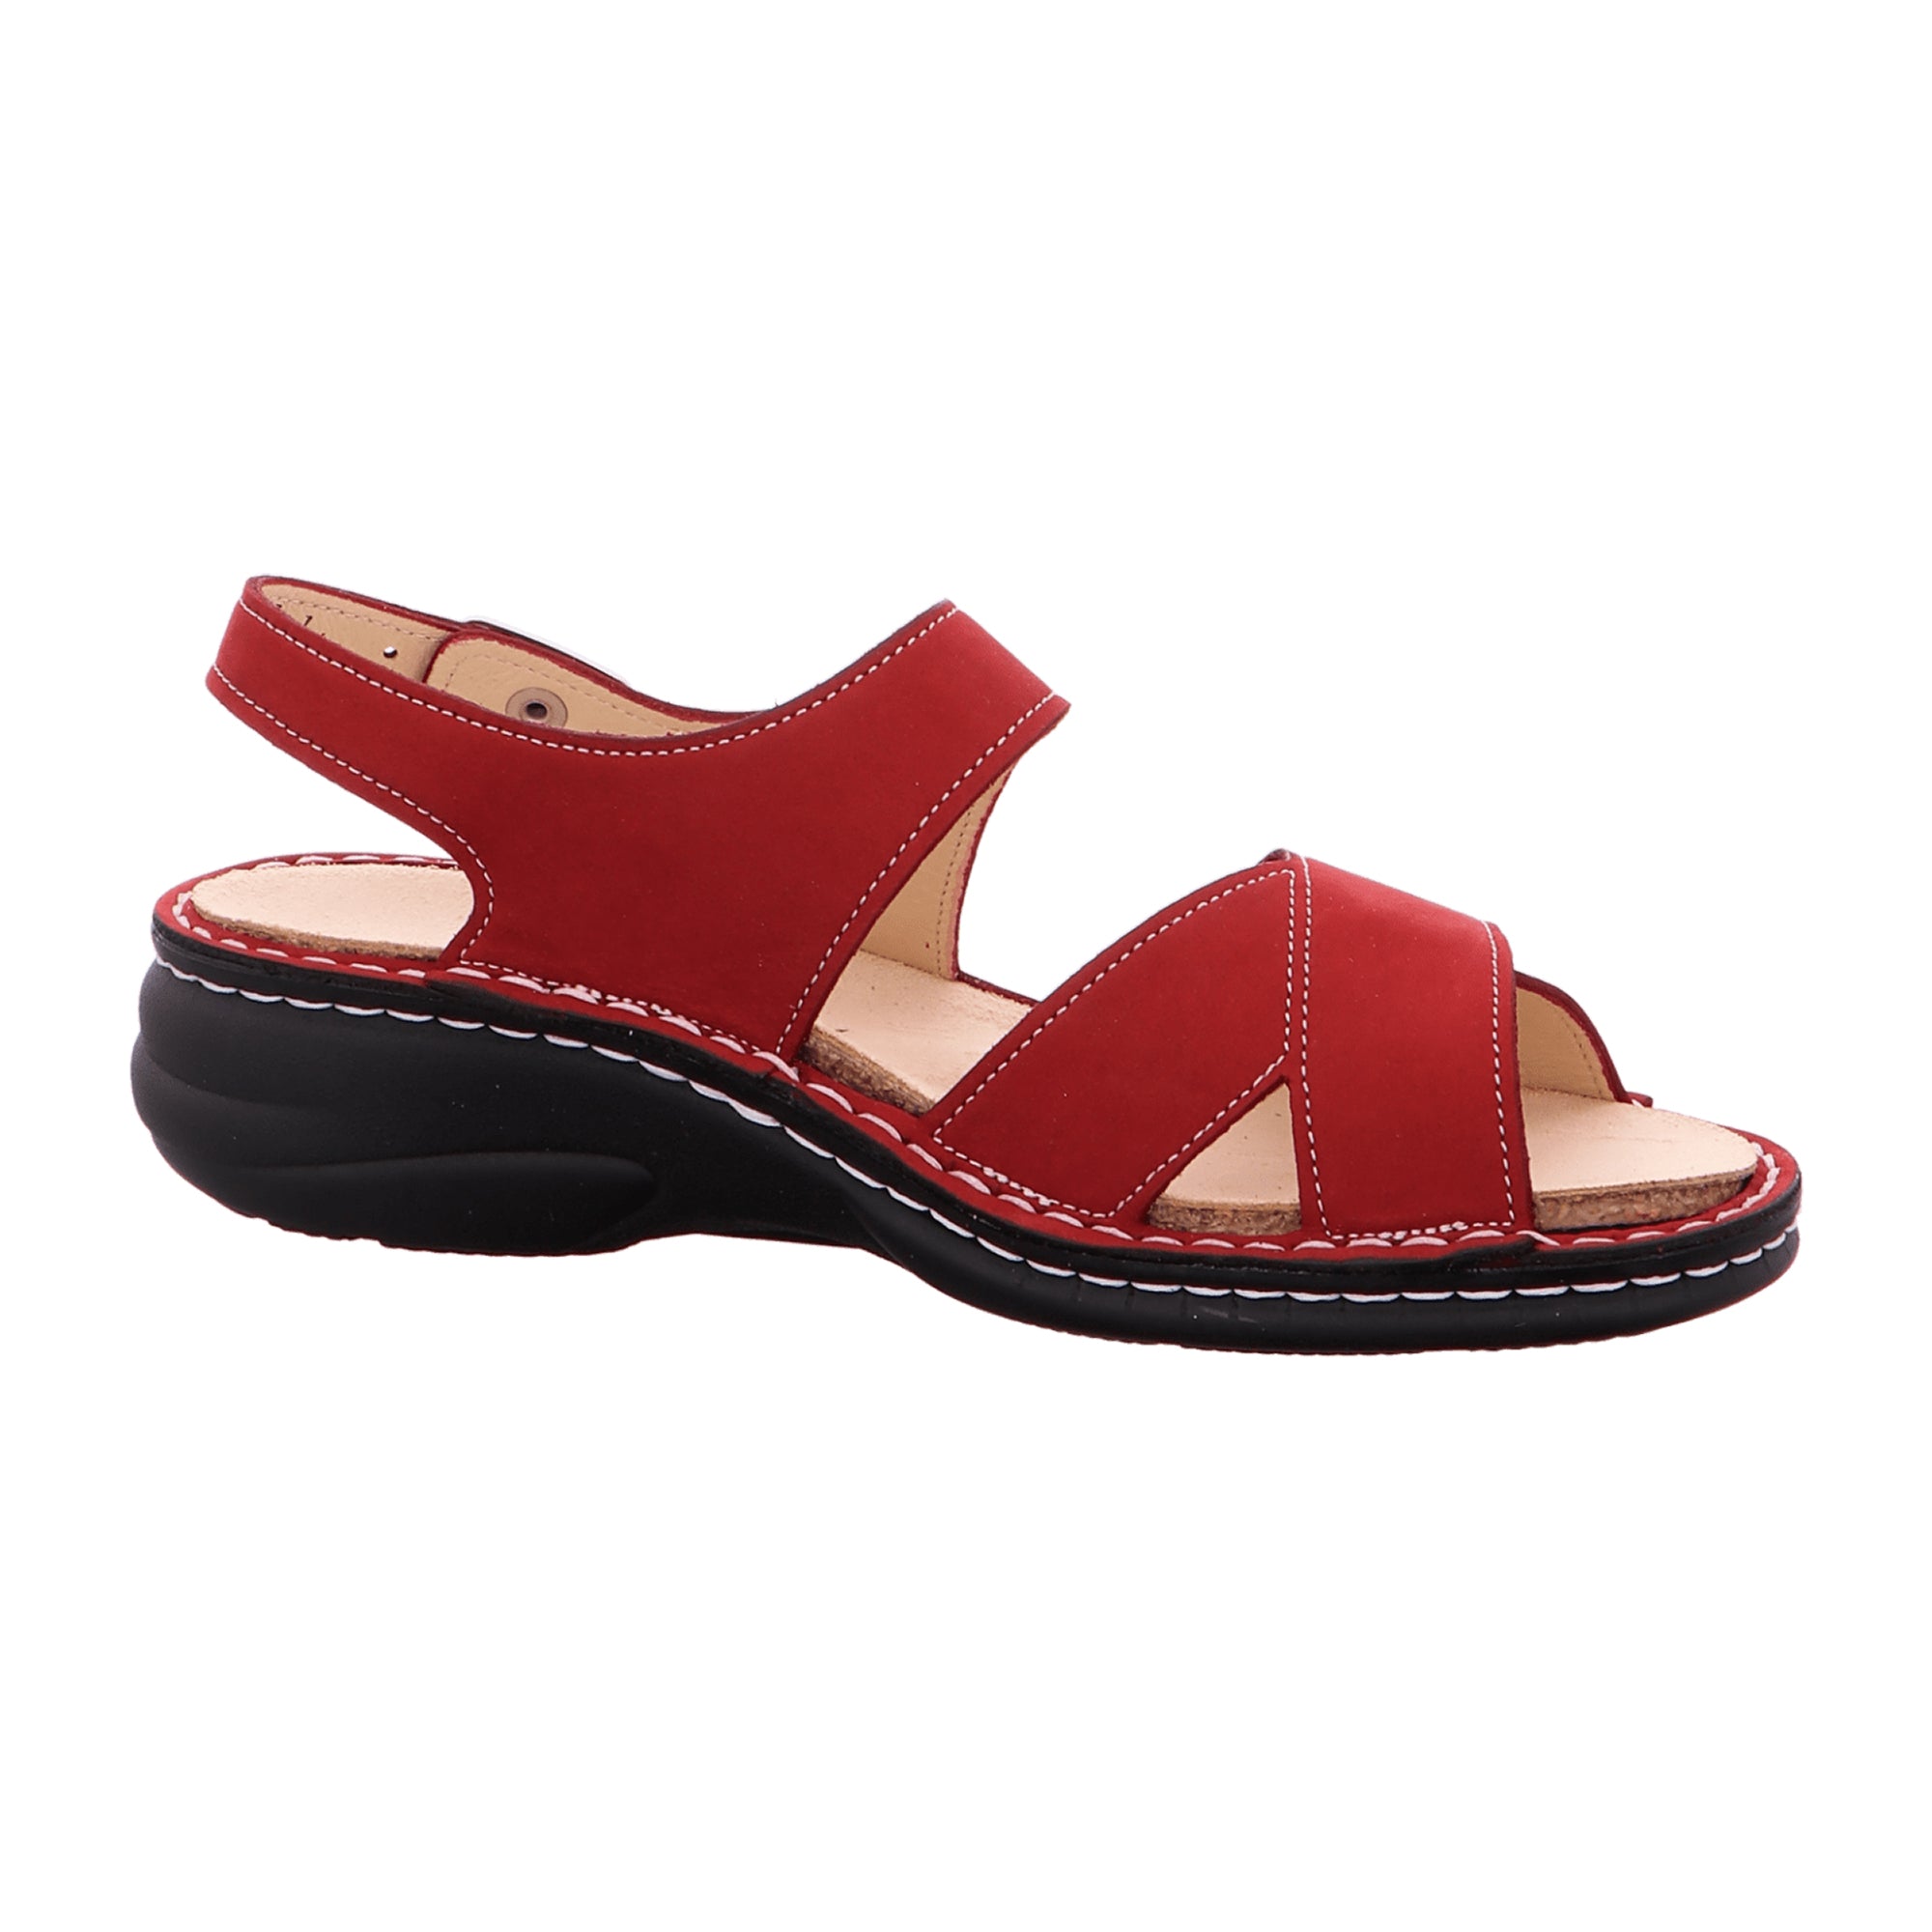 Finn Comfort Linosa Women's Sandals - Chili Red Nubuck Leather with Adjustable Straps and Removable Insoles